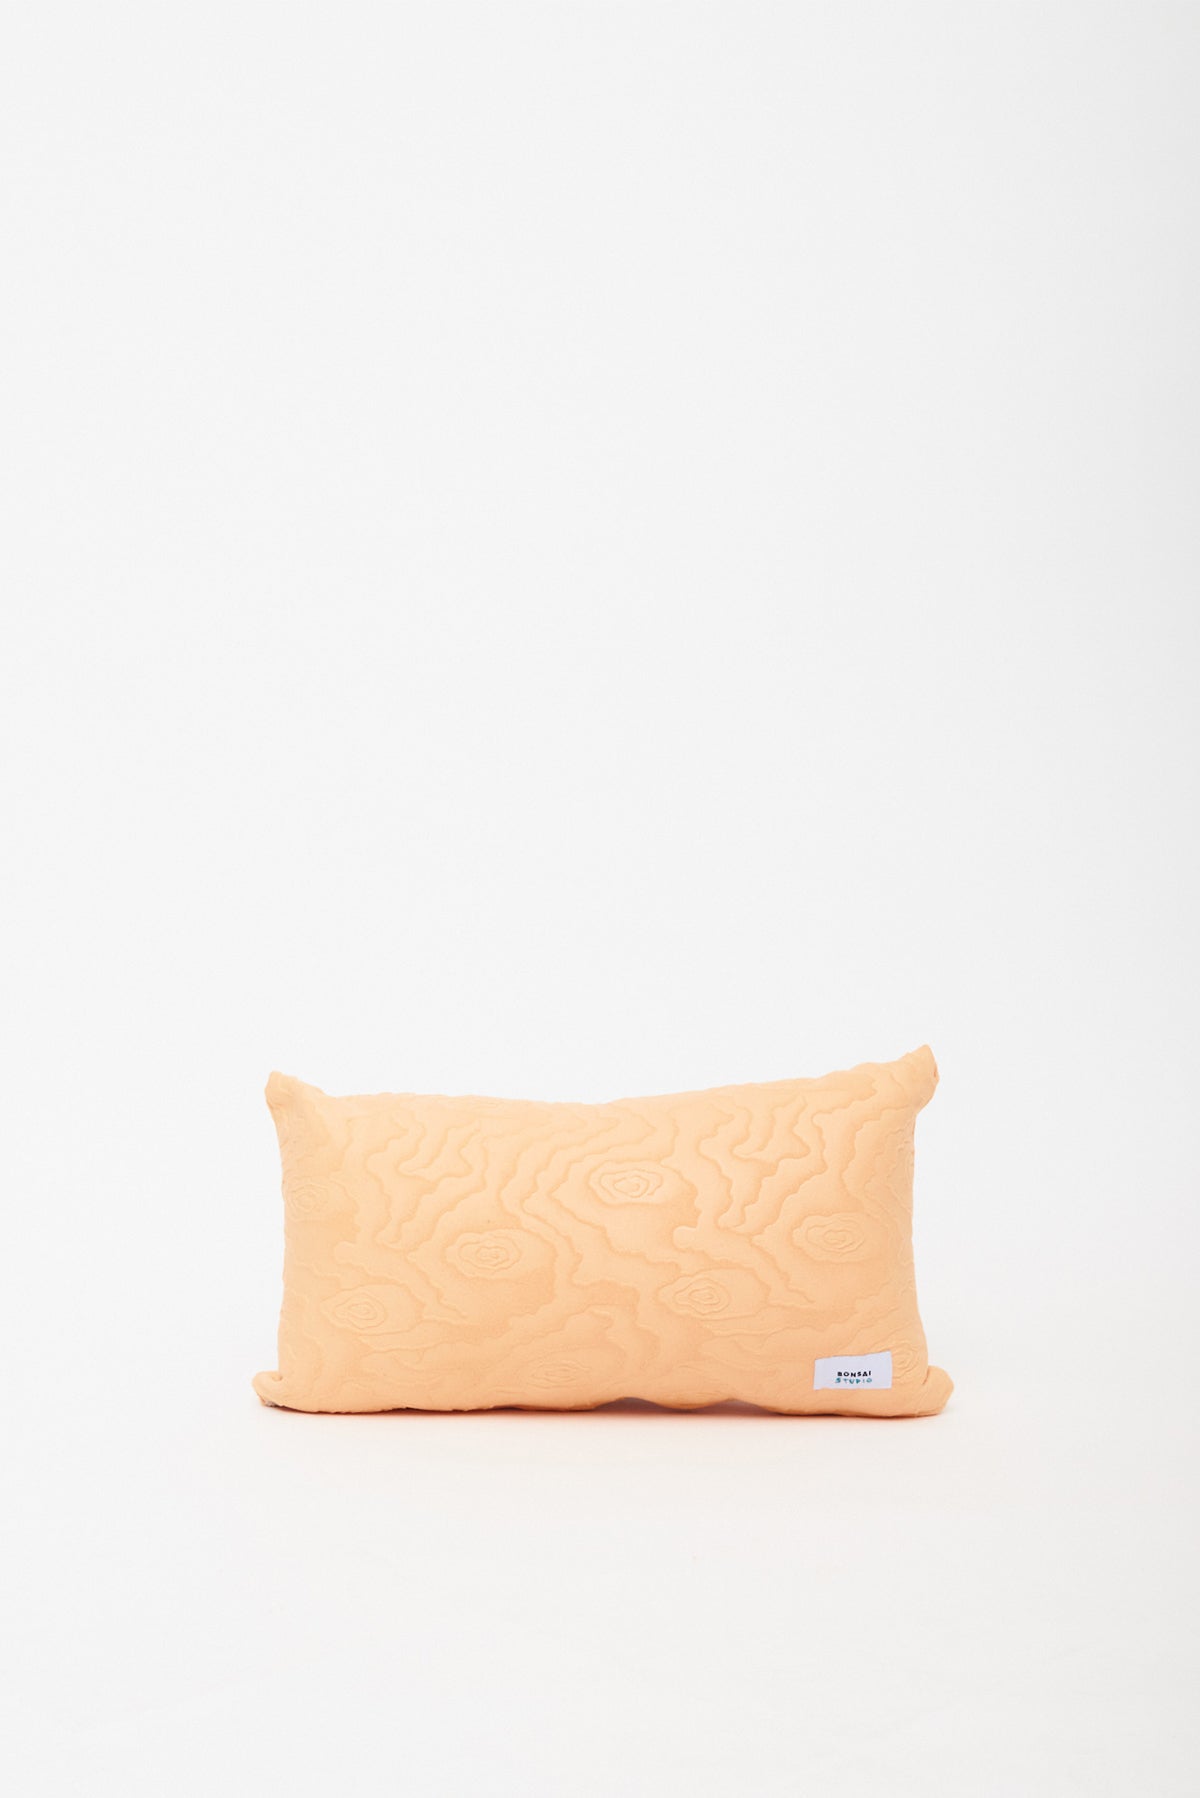 BARK LONG CUSHION-UP TO 70% OFF